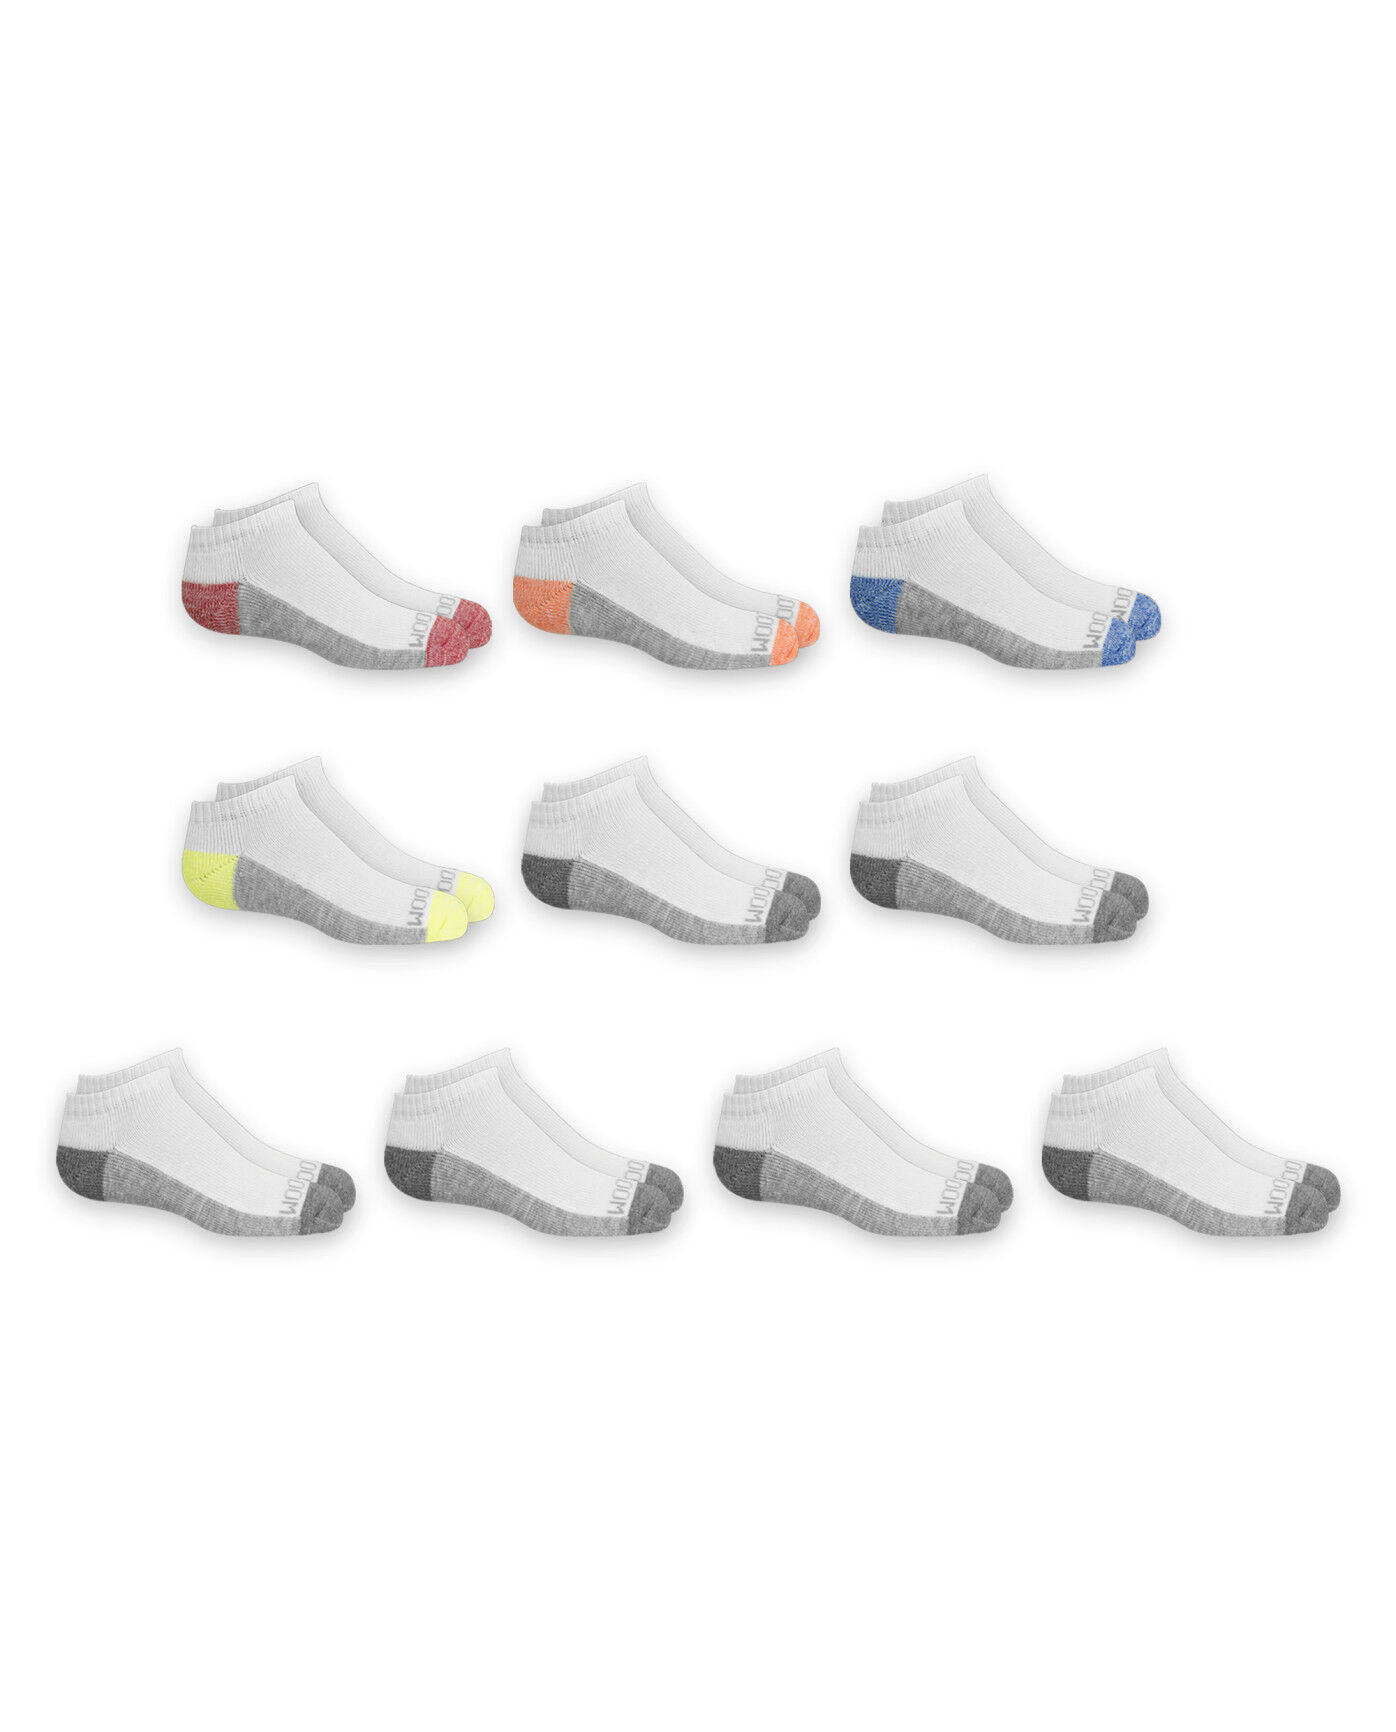 3-6 Sport Sock 3-Pack soft & durable socks White Details about   NWT Gymboree Boys YS